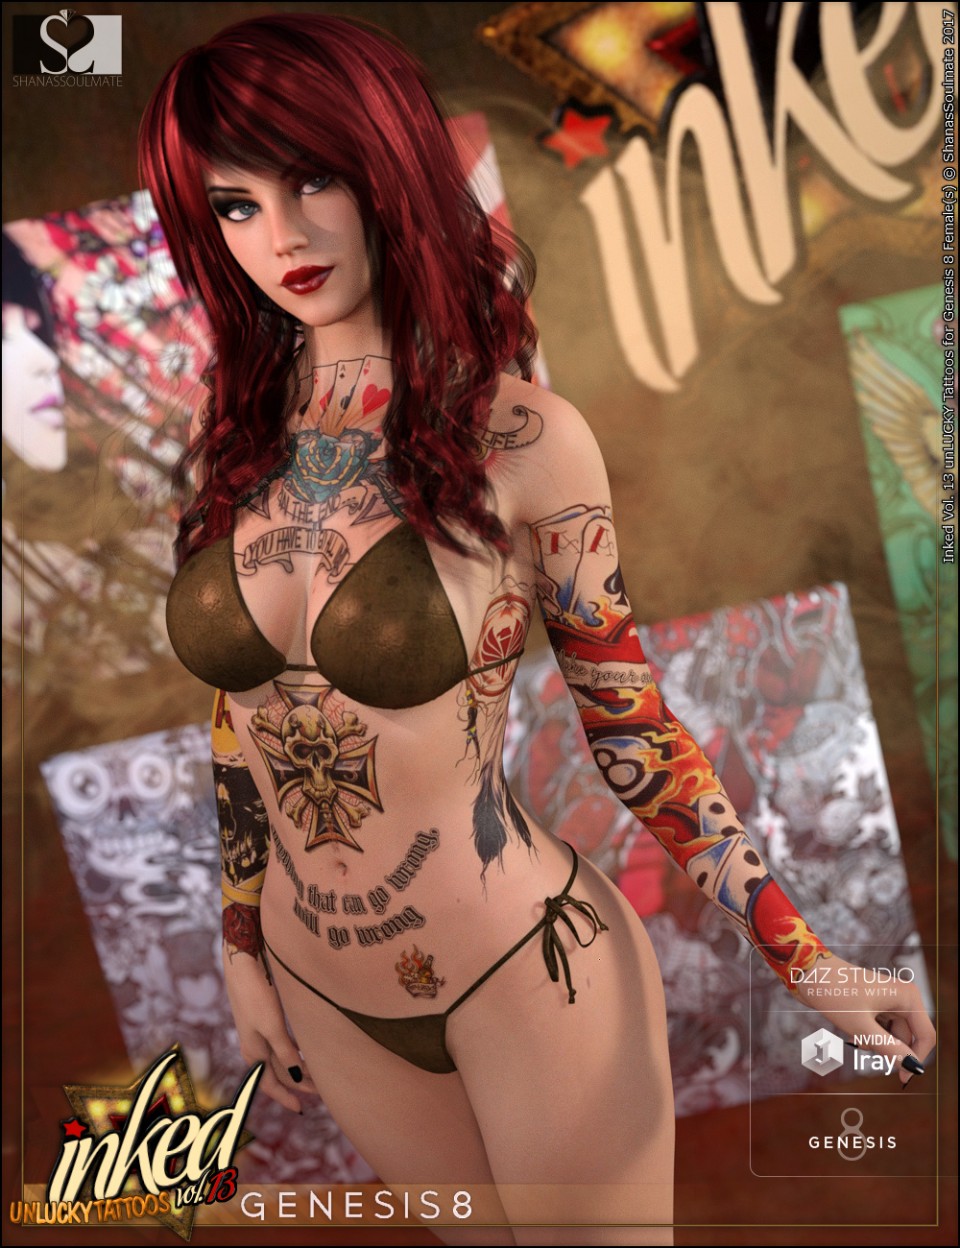 inked-vol.13-unlucky-tattoos-for-genesis-8-female(s)